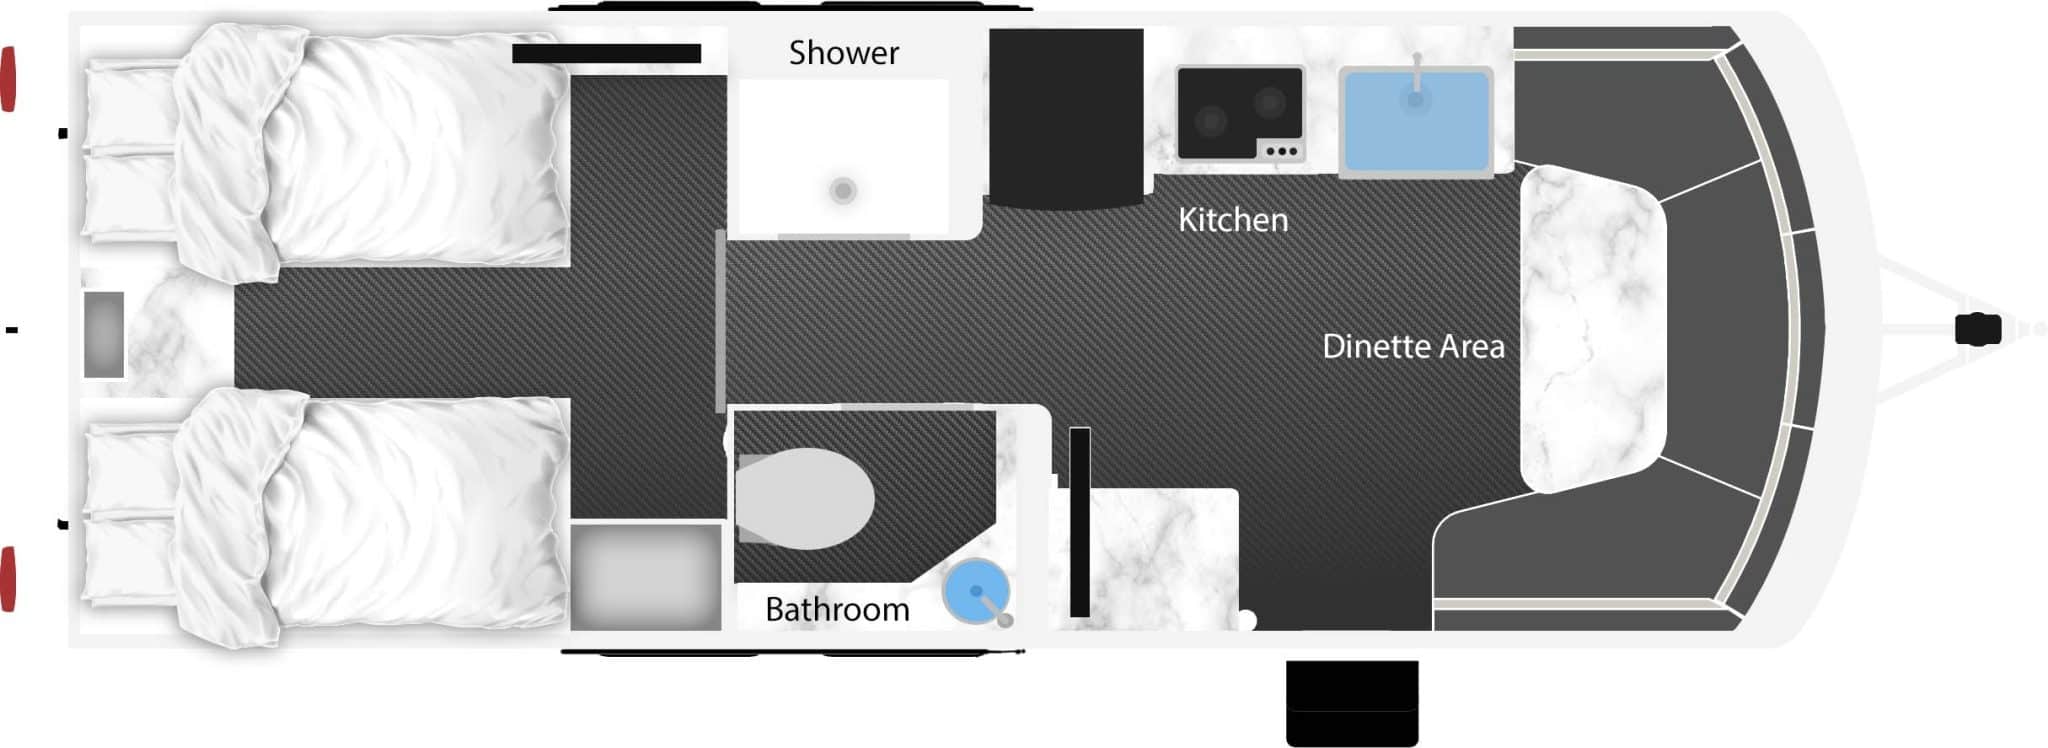 Discovering Comfort on Wheels: An In-Depth Guide to Travel Trailer Floor Plans with Twin Beds